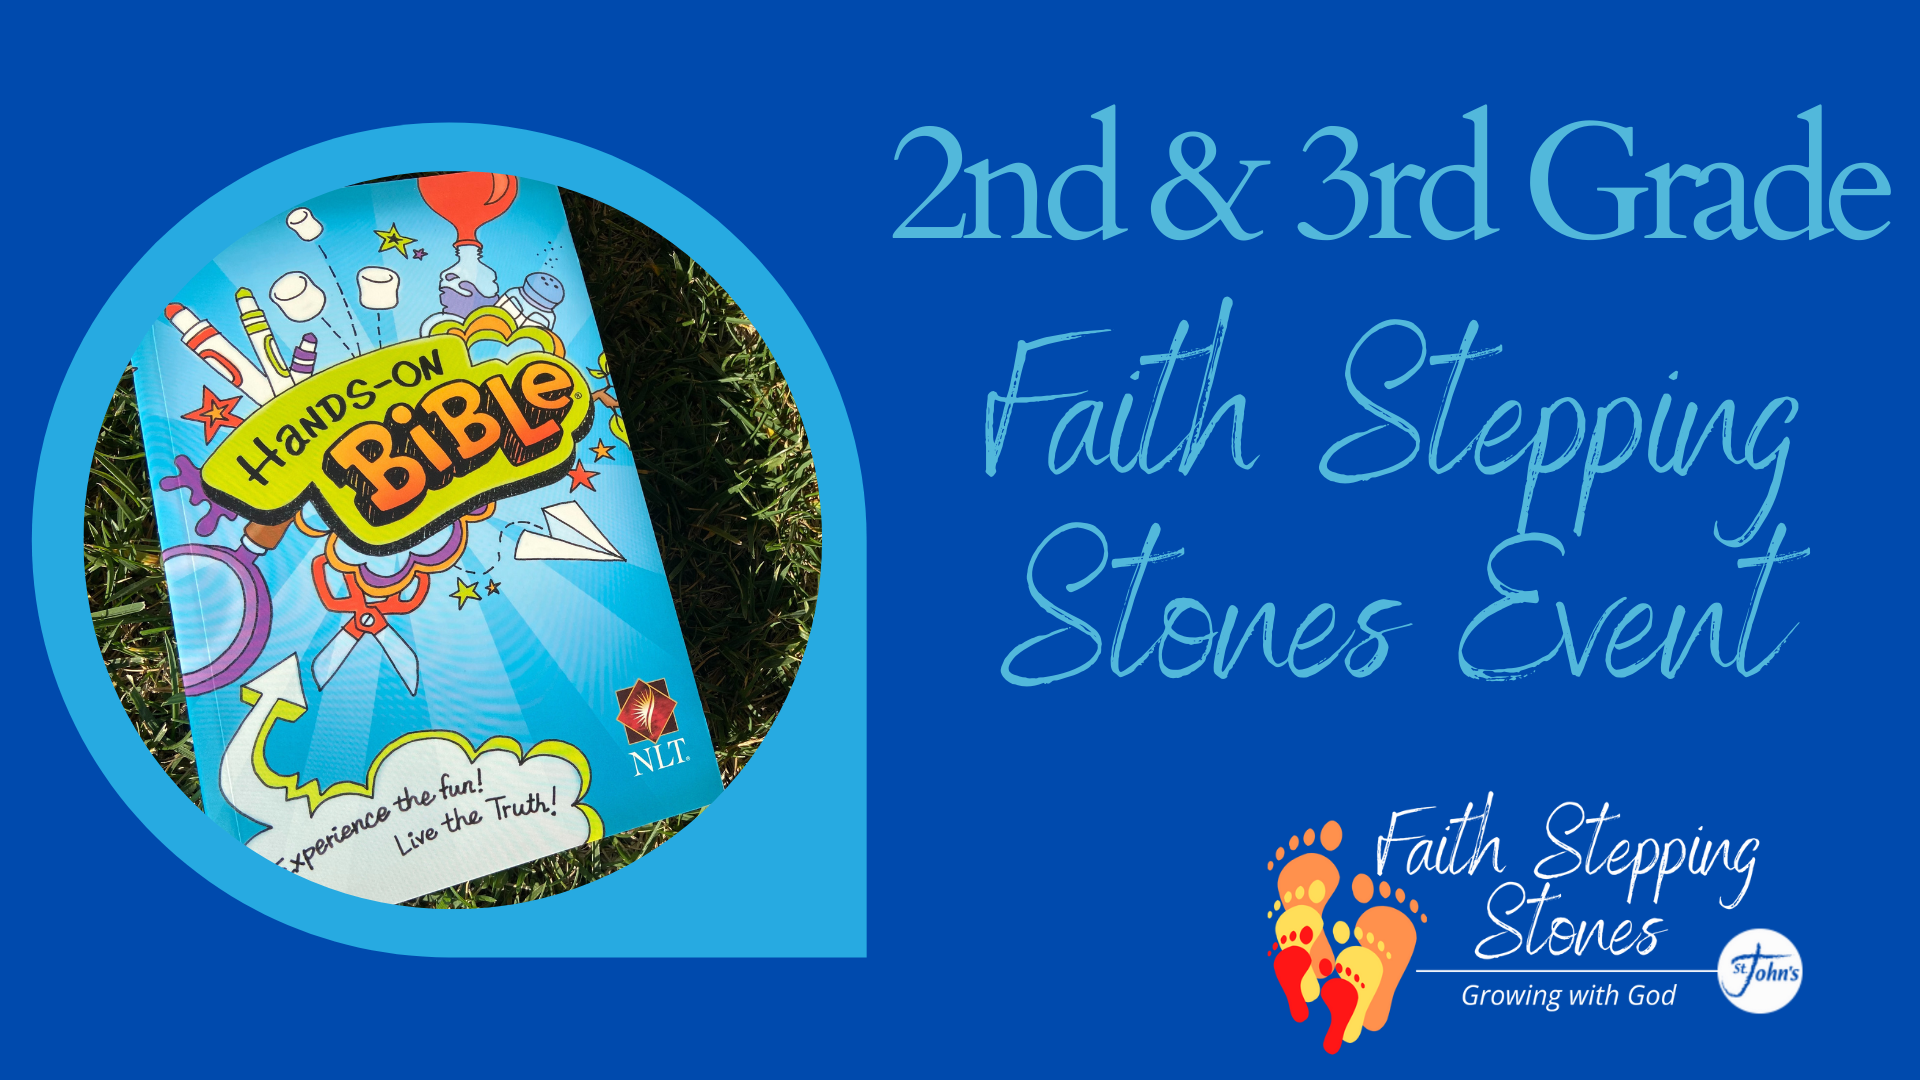 Faith Stepping Stones - 2nd & 3rd Grade Event